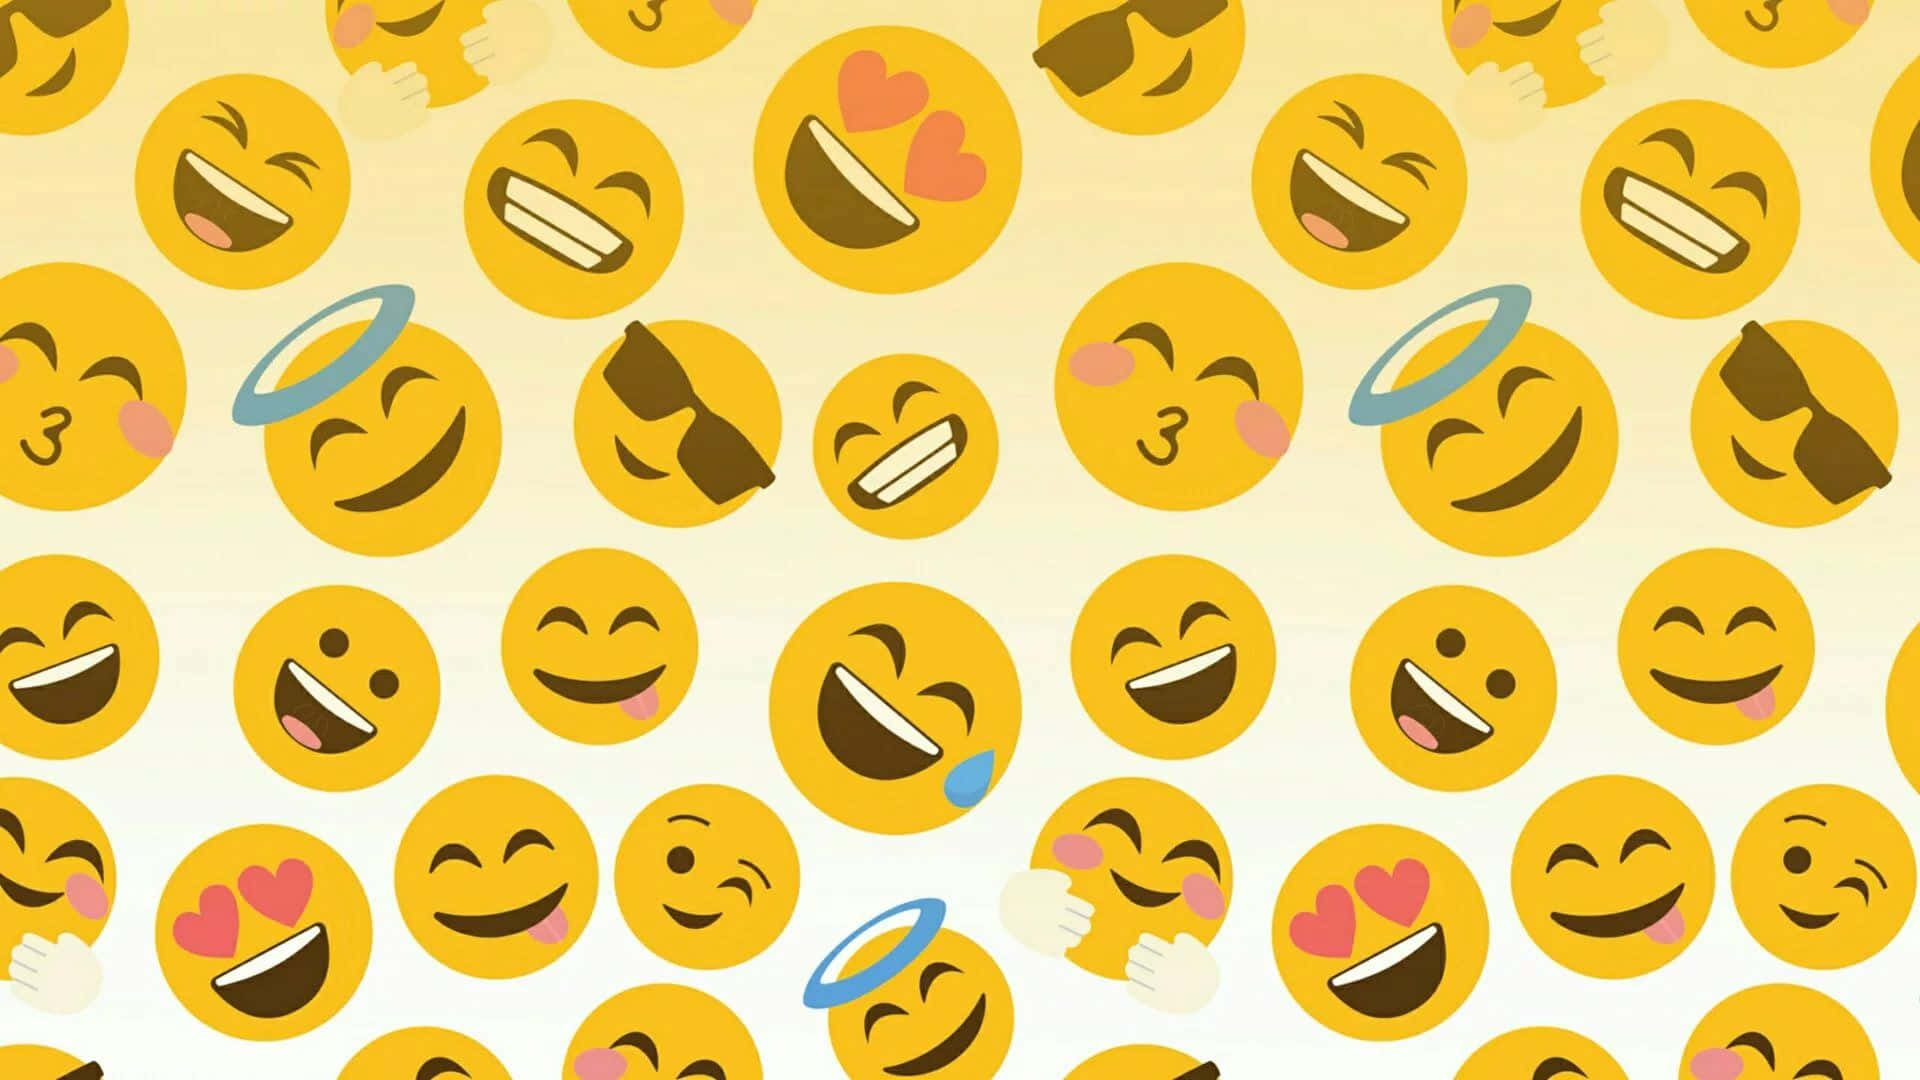 Get the party started in style with this fun Emoji-filled background